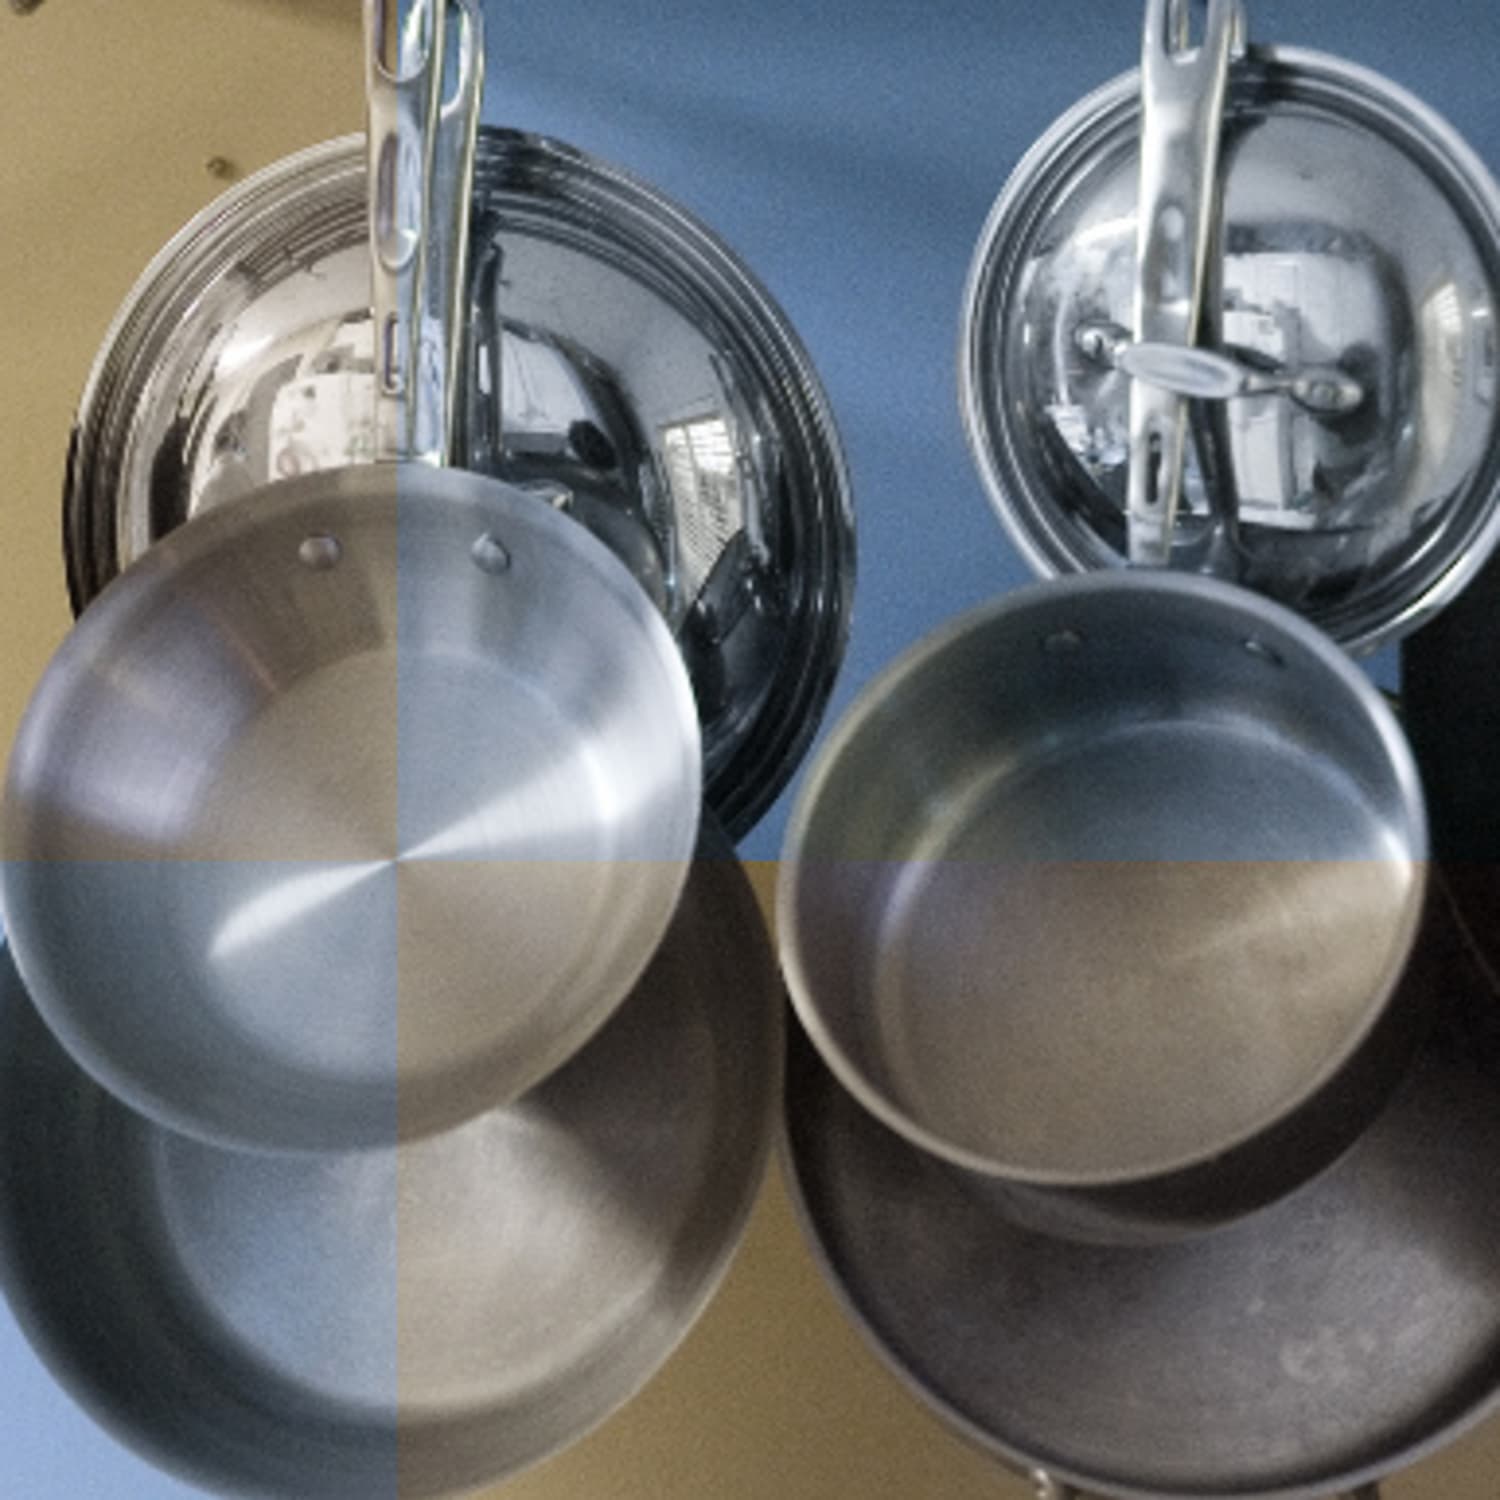 Food Science: Explaining Reactive and Non-Reactive Cookware